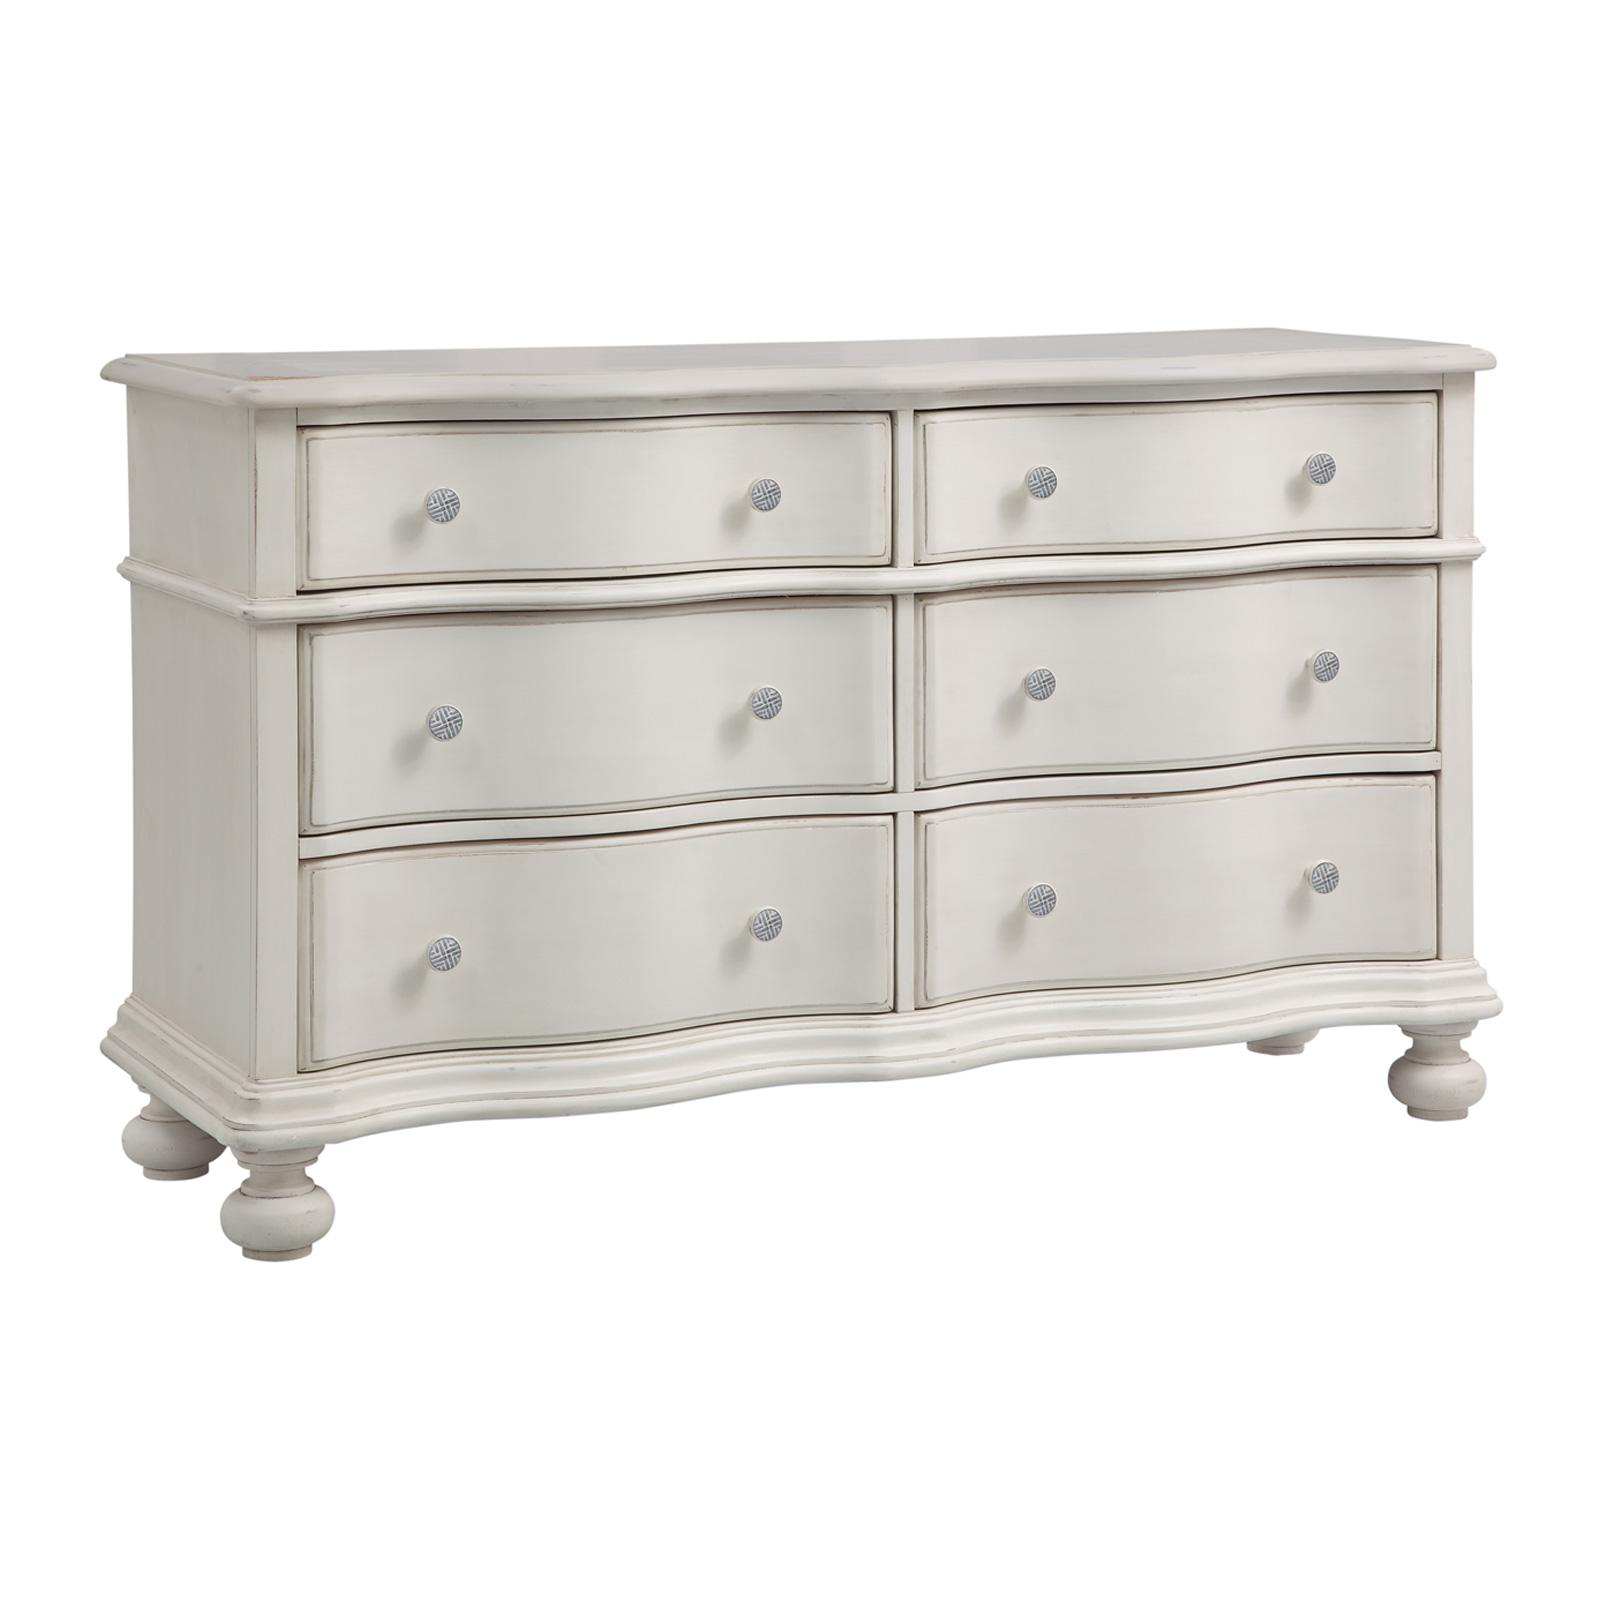 Youth, Traditional, Cottage Double Dresser Rodanthe 3910-260 3910-260 in White Finish 